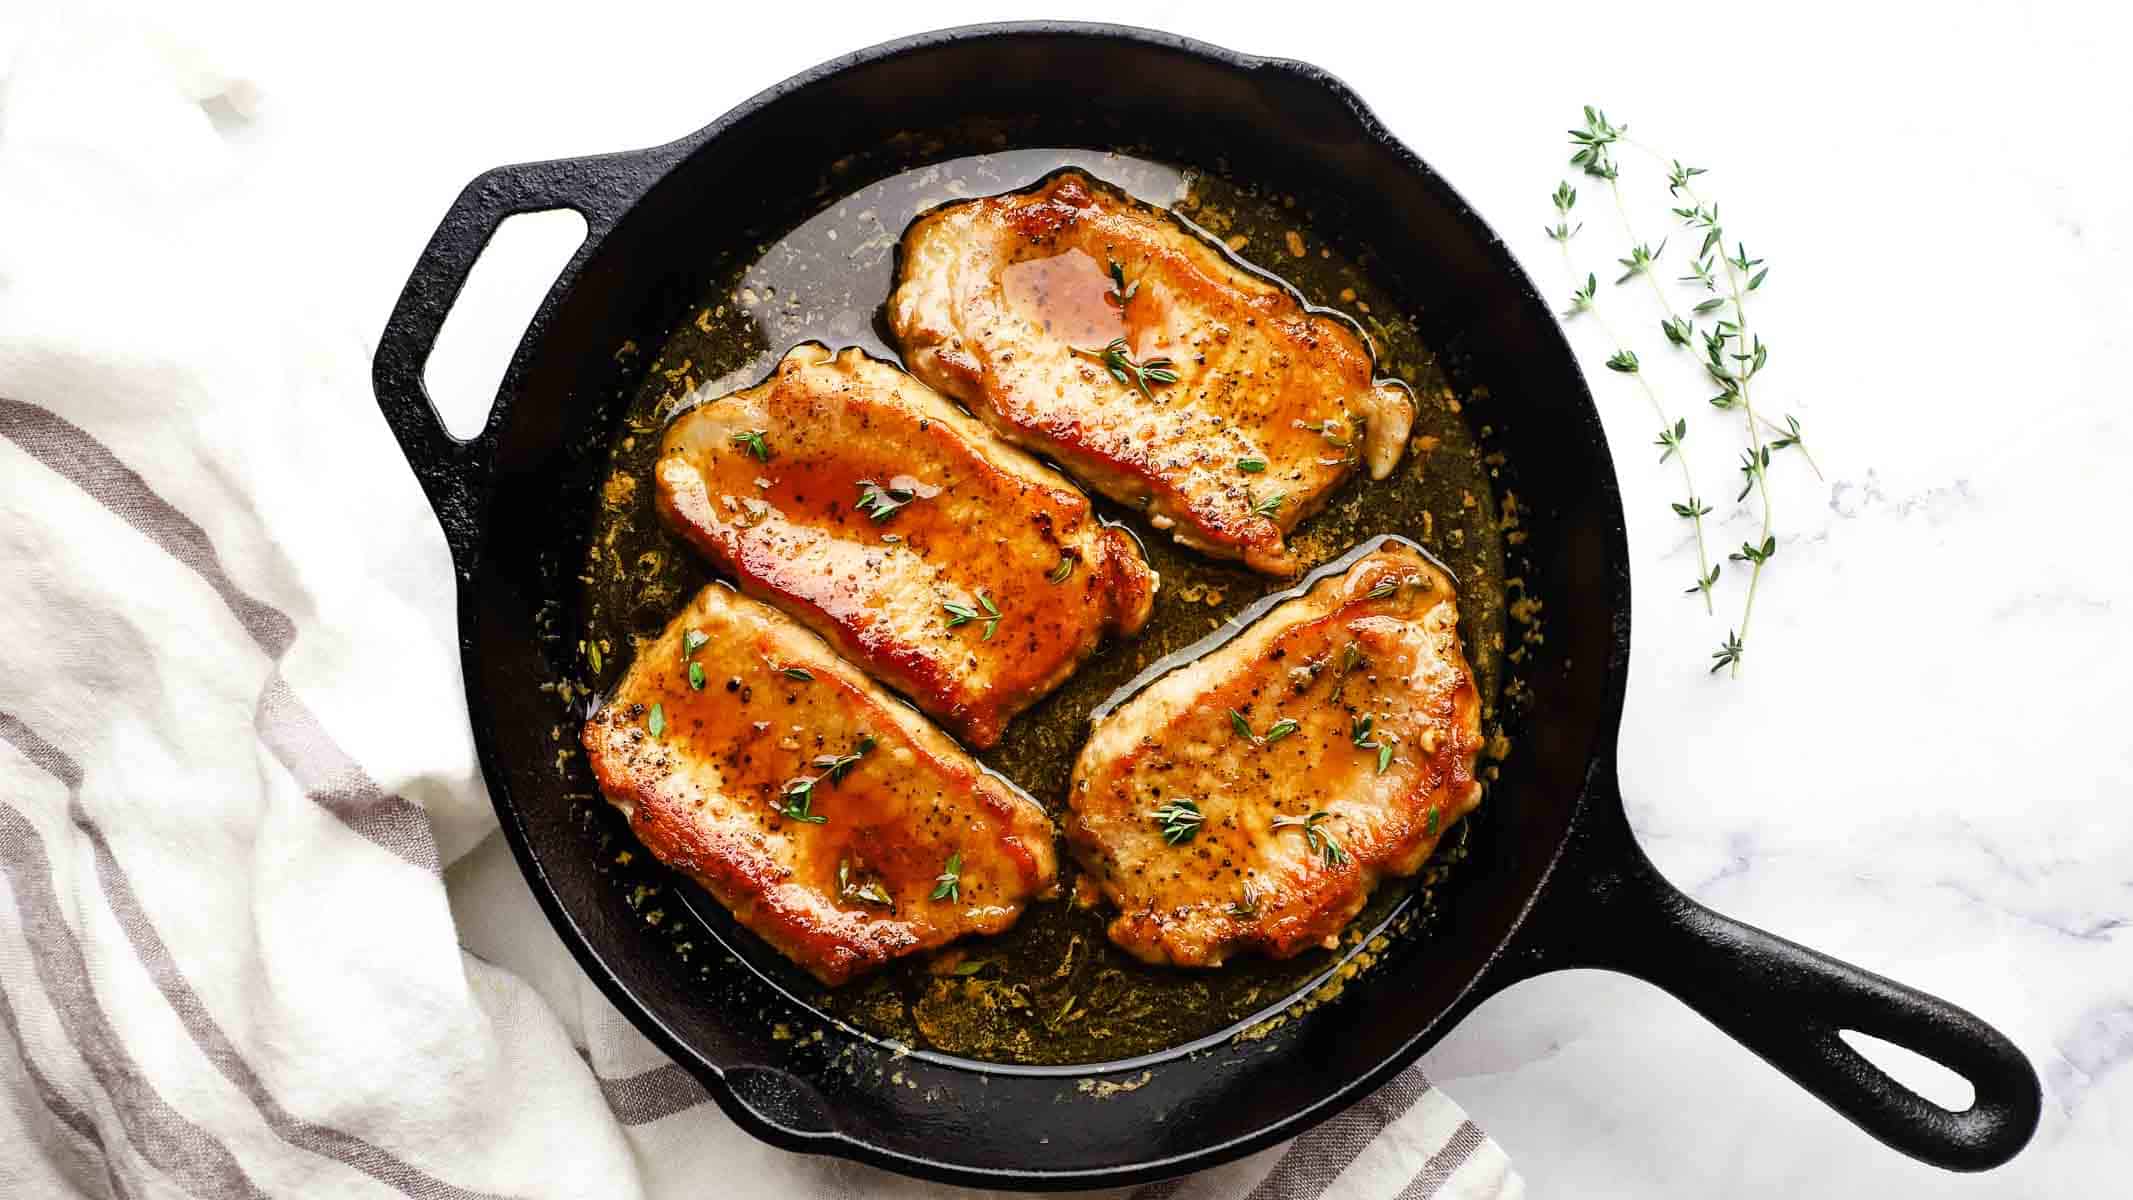 maple glazed pork chops in a cast iron skillet